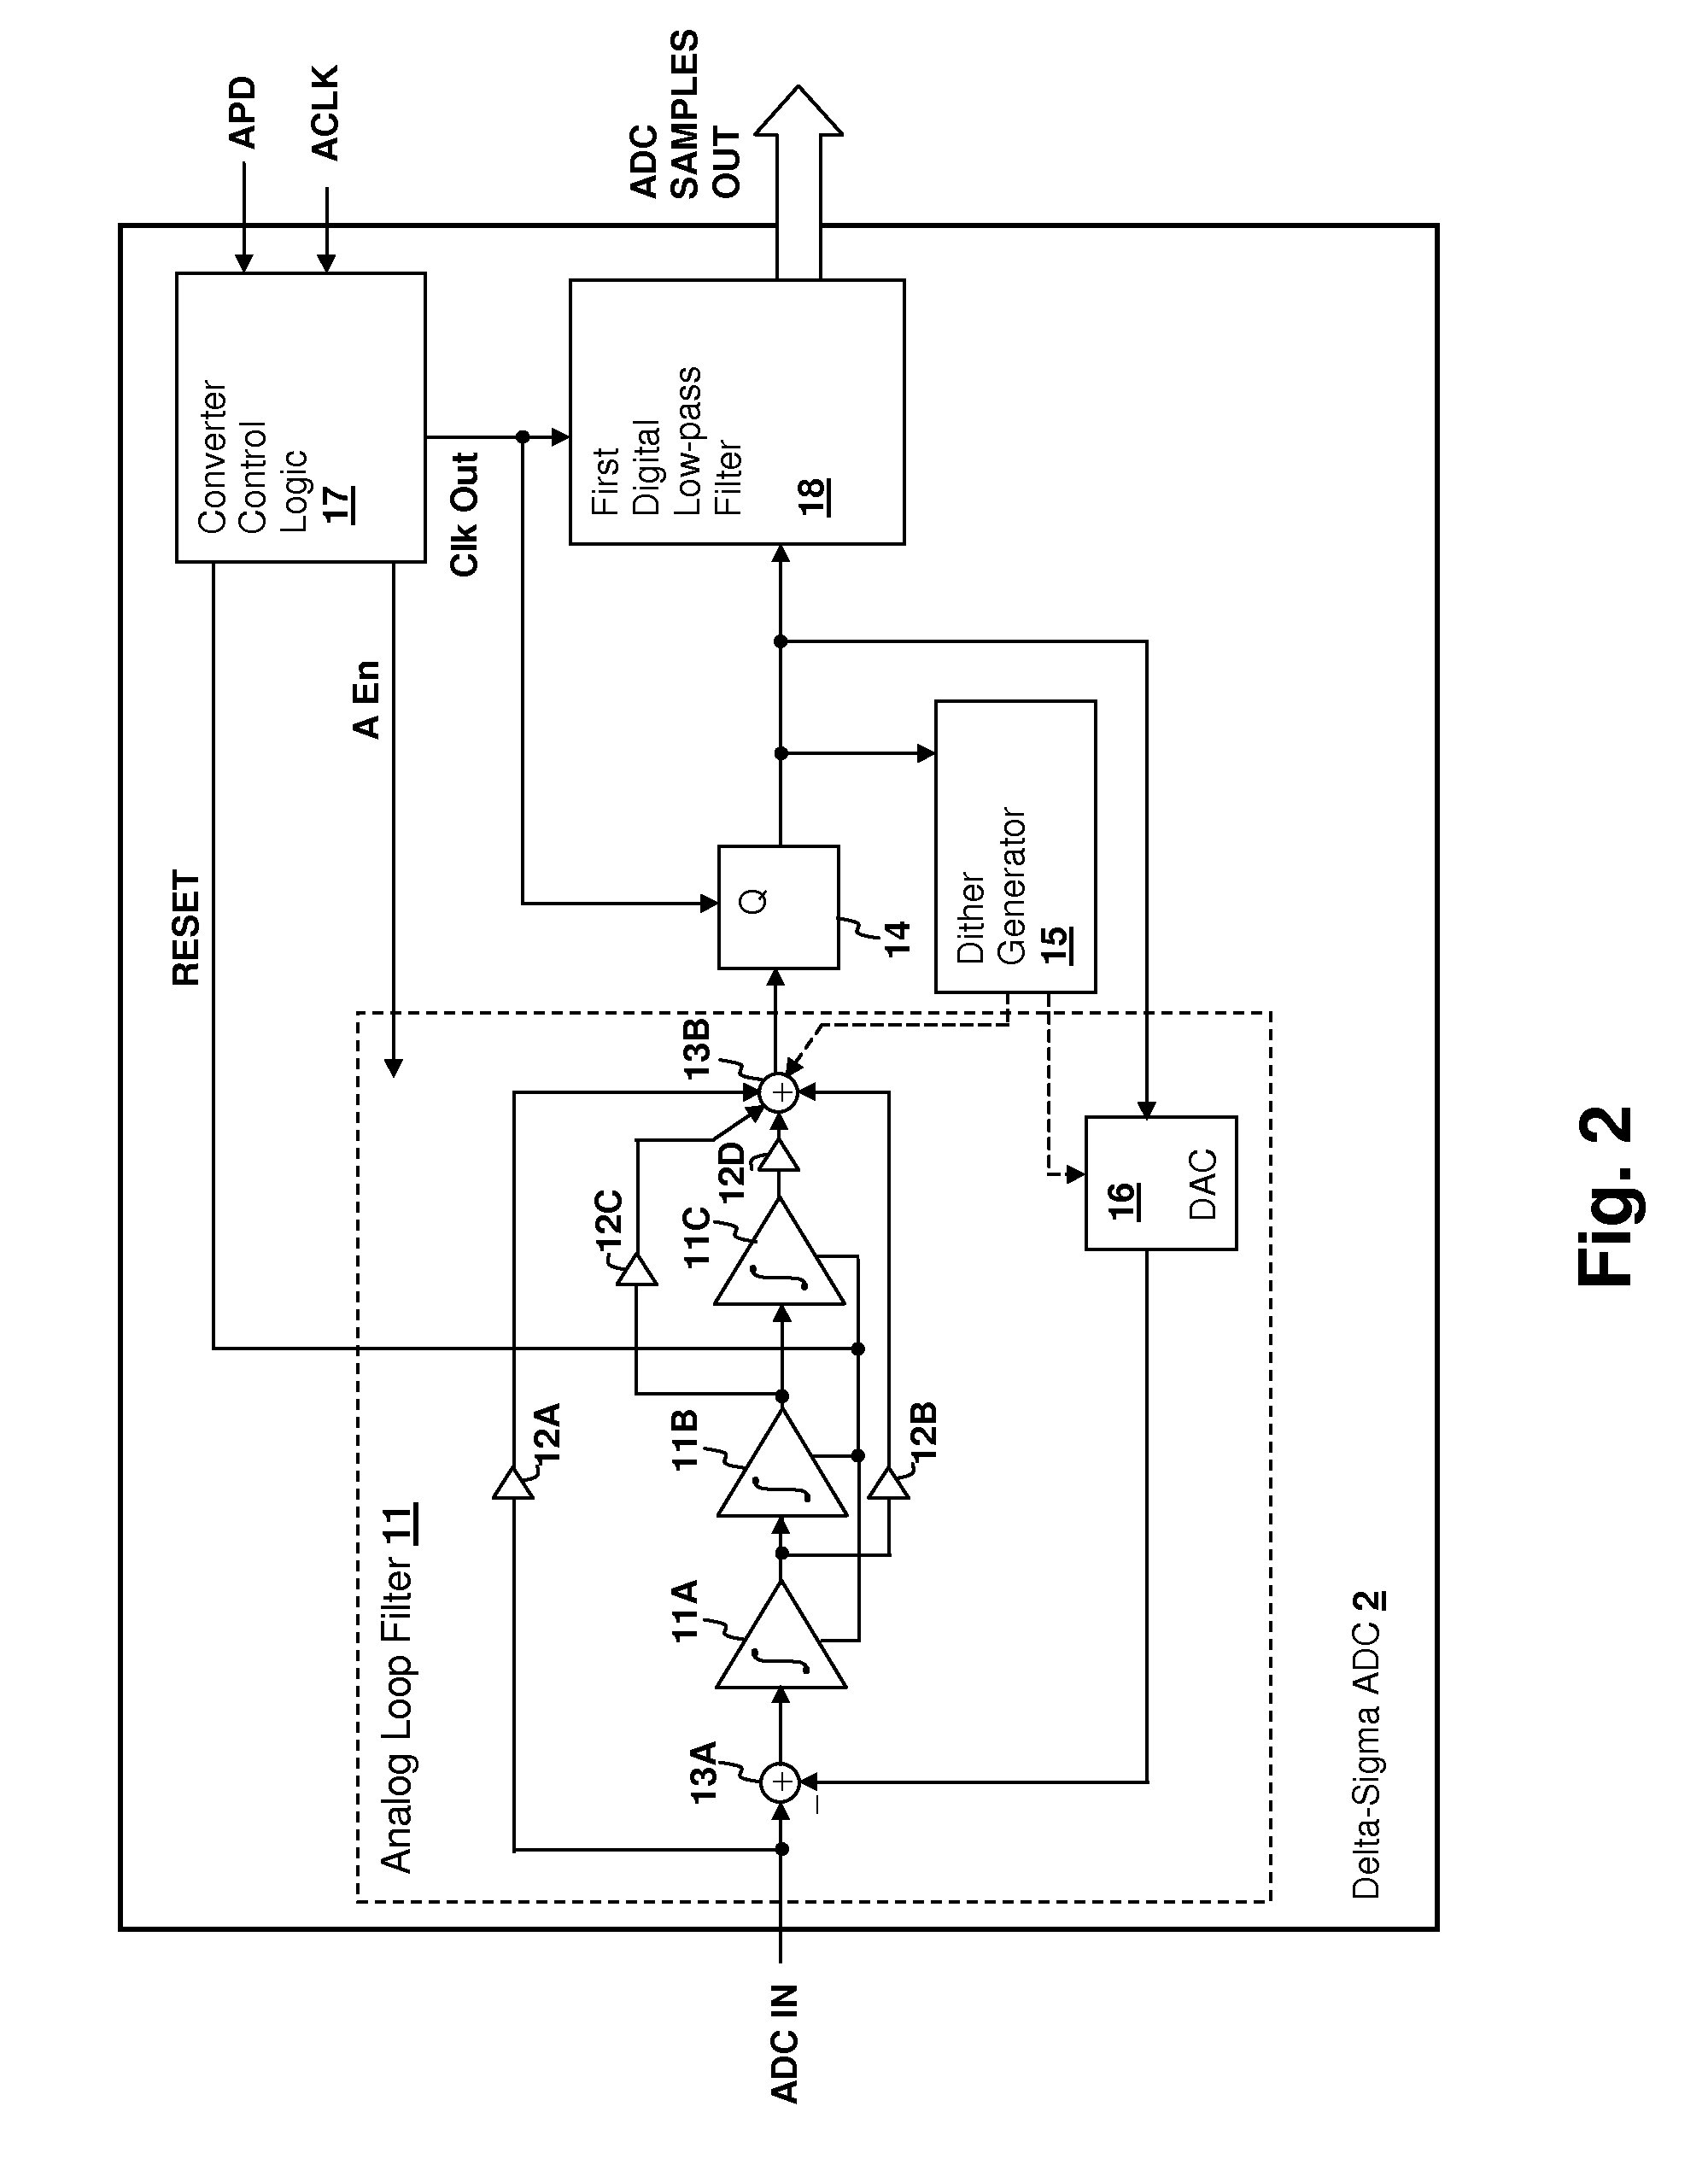 System-on-chip (SoC) integrated circuit including interleaved delta-sigma analog-to-digital converter (ADC)